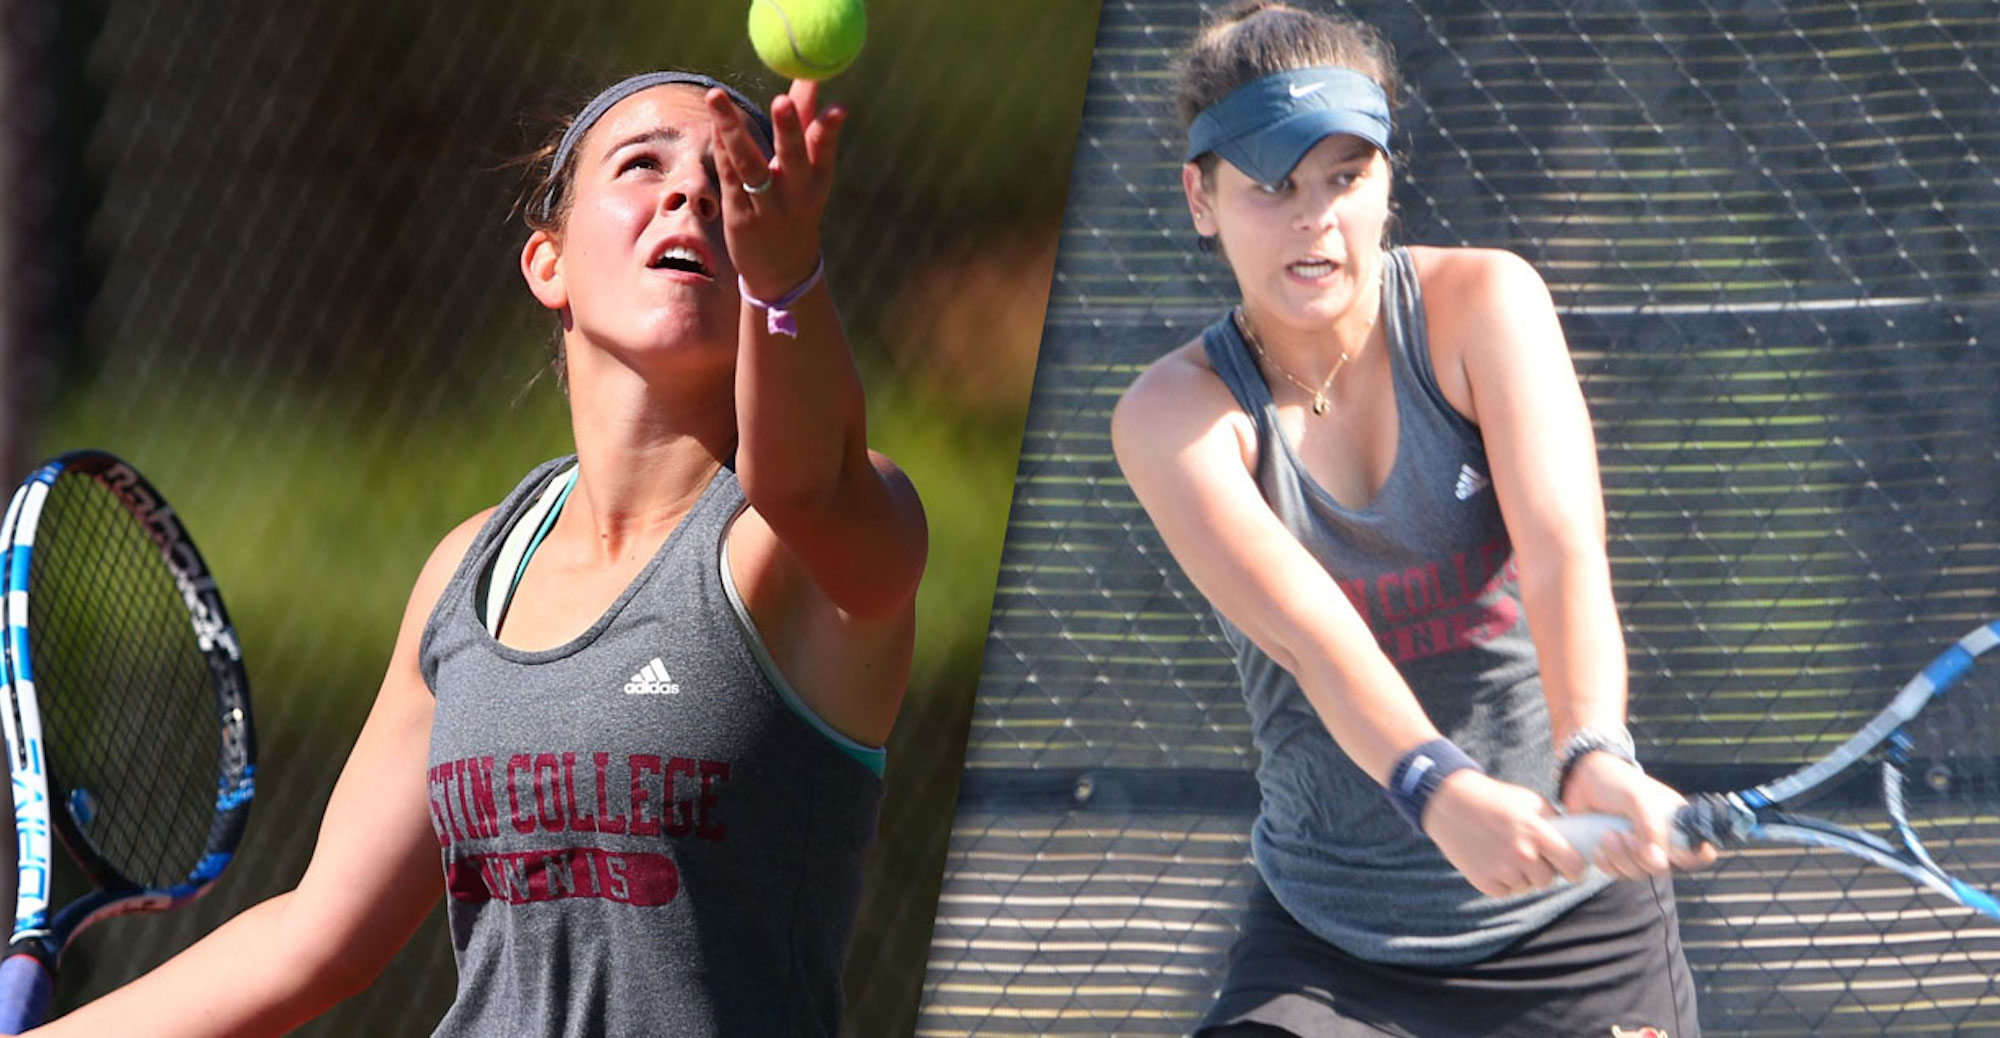 Sergiovanni, Carvajalino Named SCAC Doubles Team of the Week